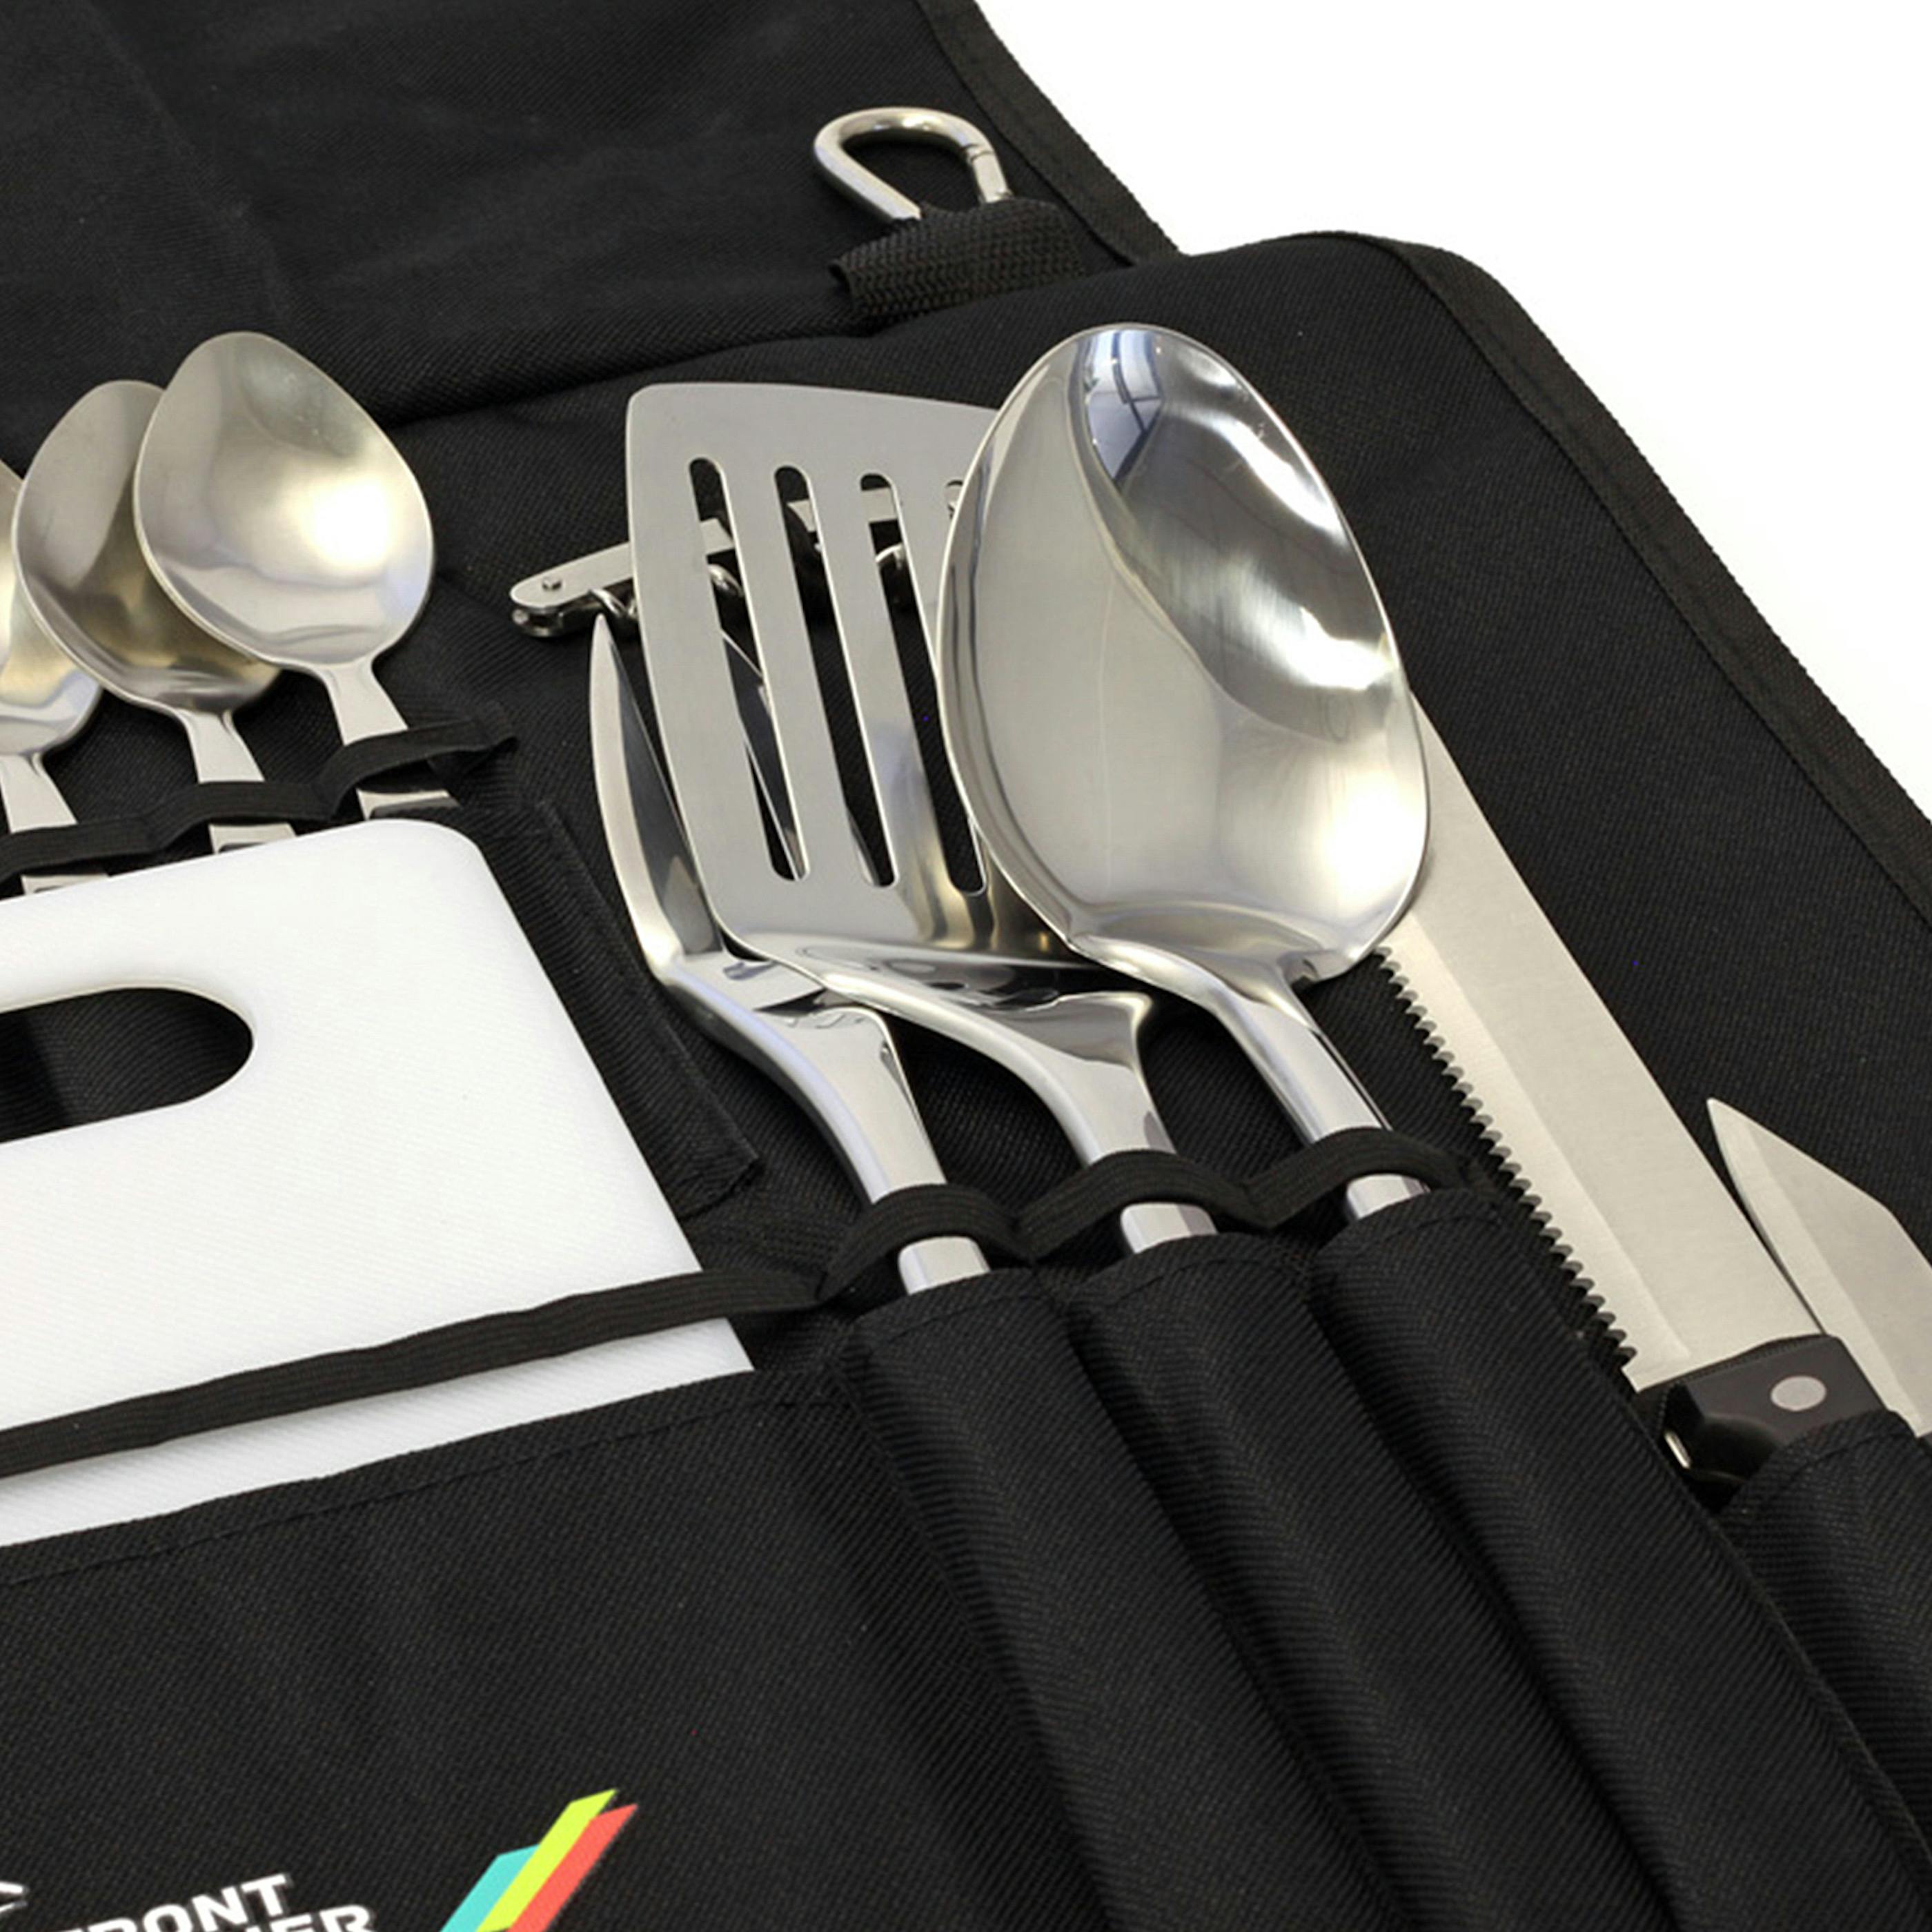 Front Runner Outfitters Camp Kitchen Utensil Set Black Camp Kitchen